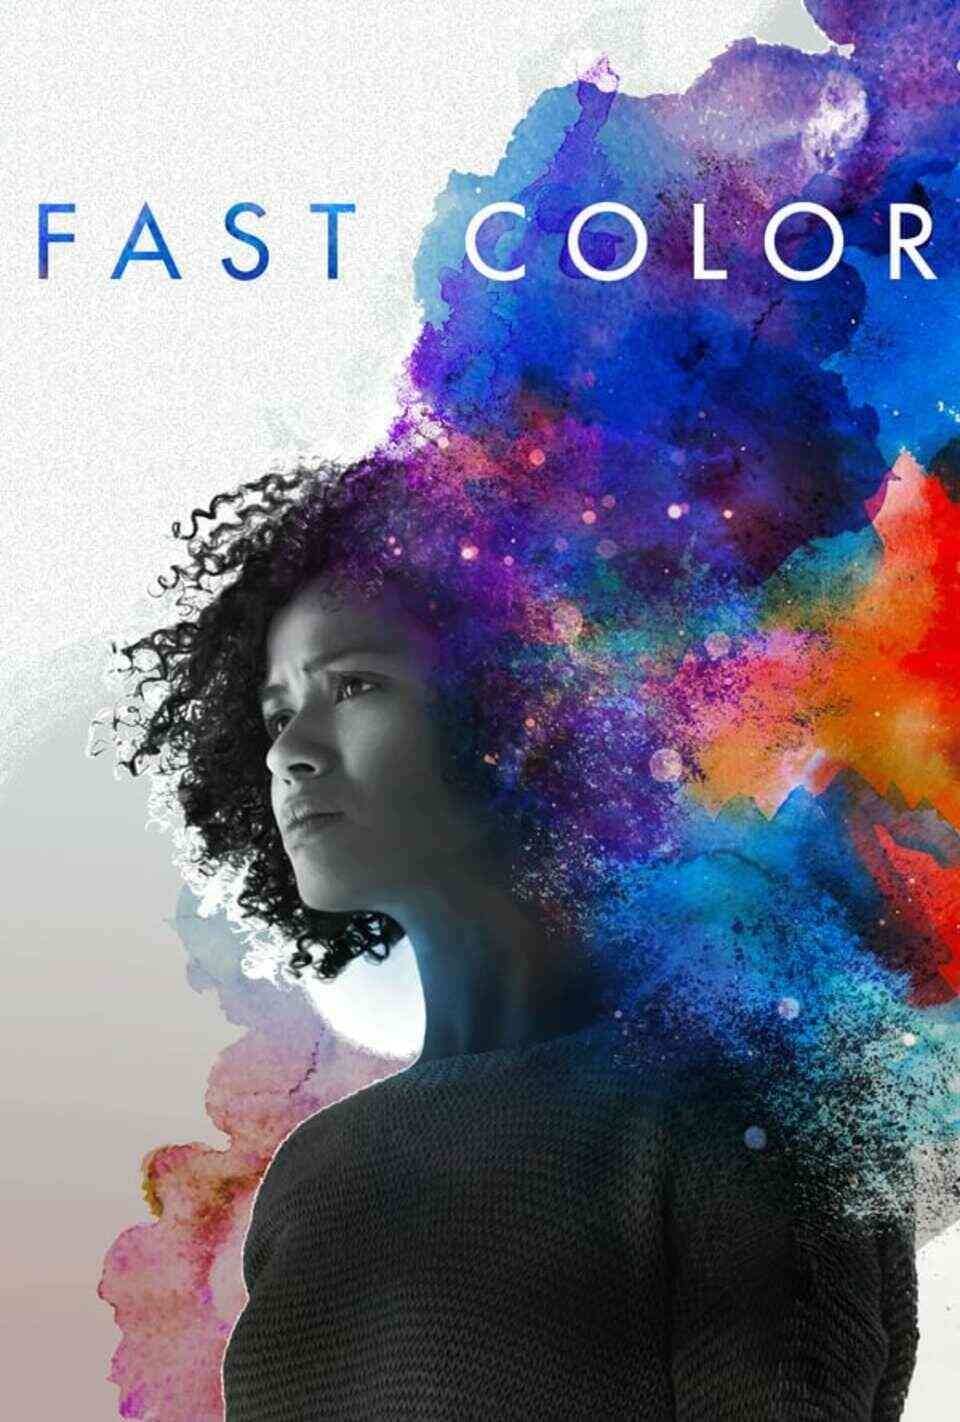 Read Fast Color screenplay (poster)